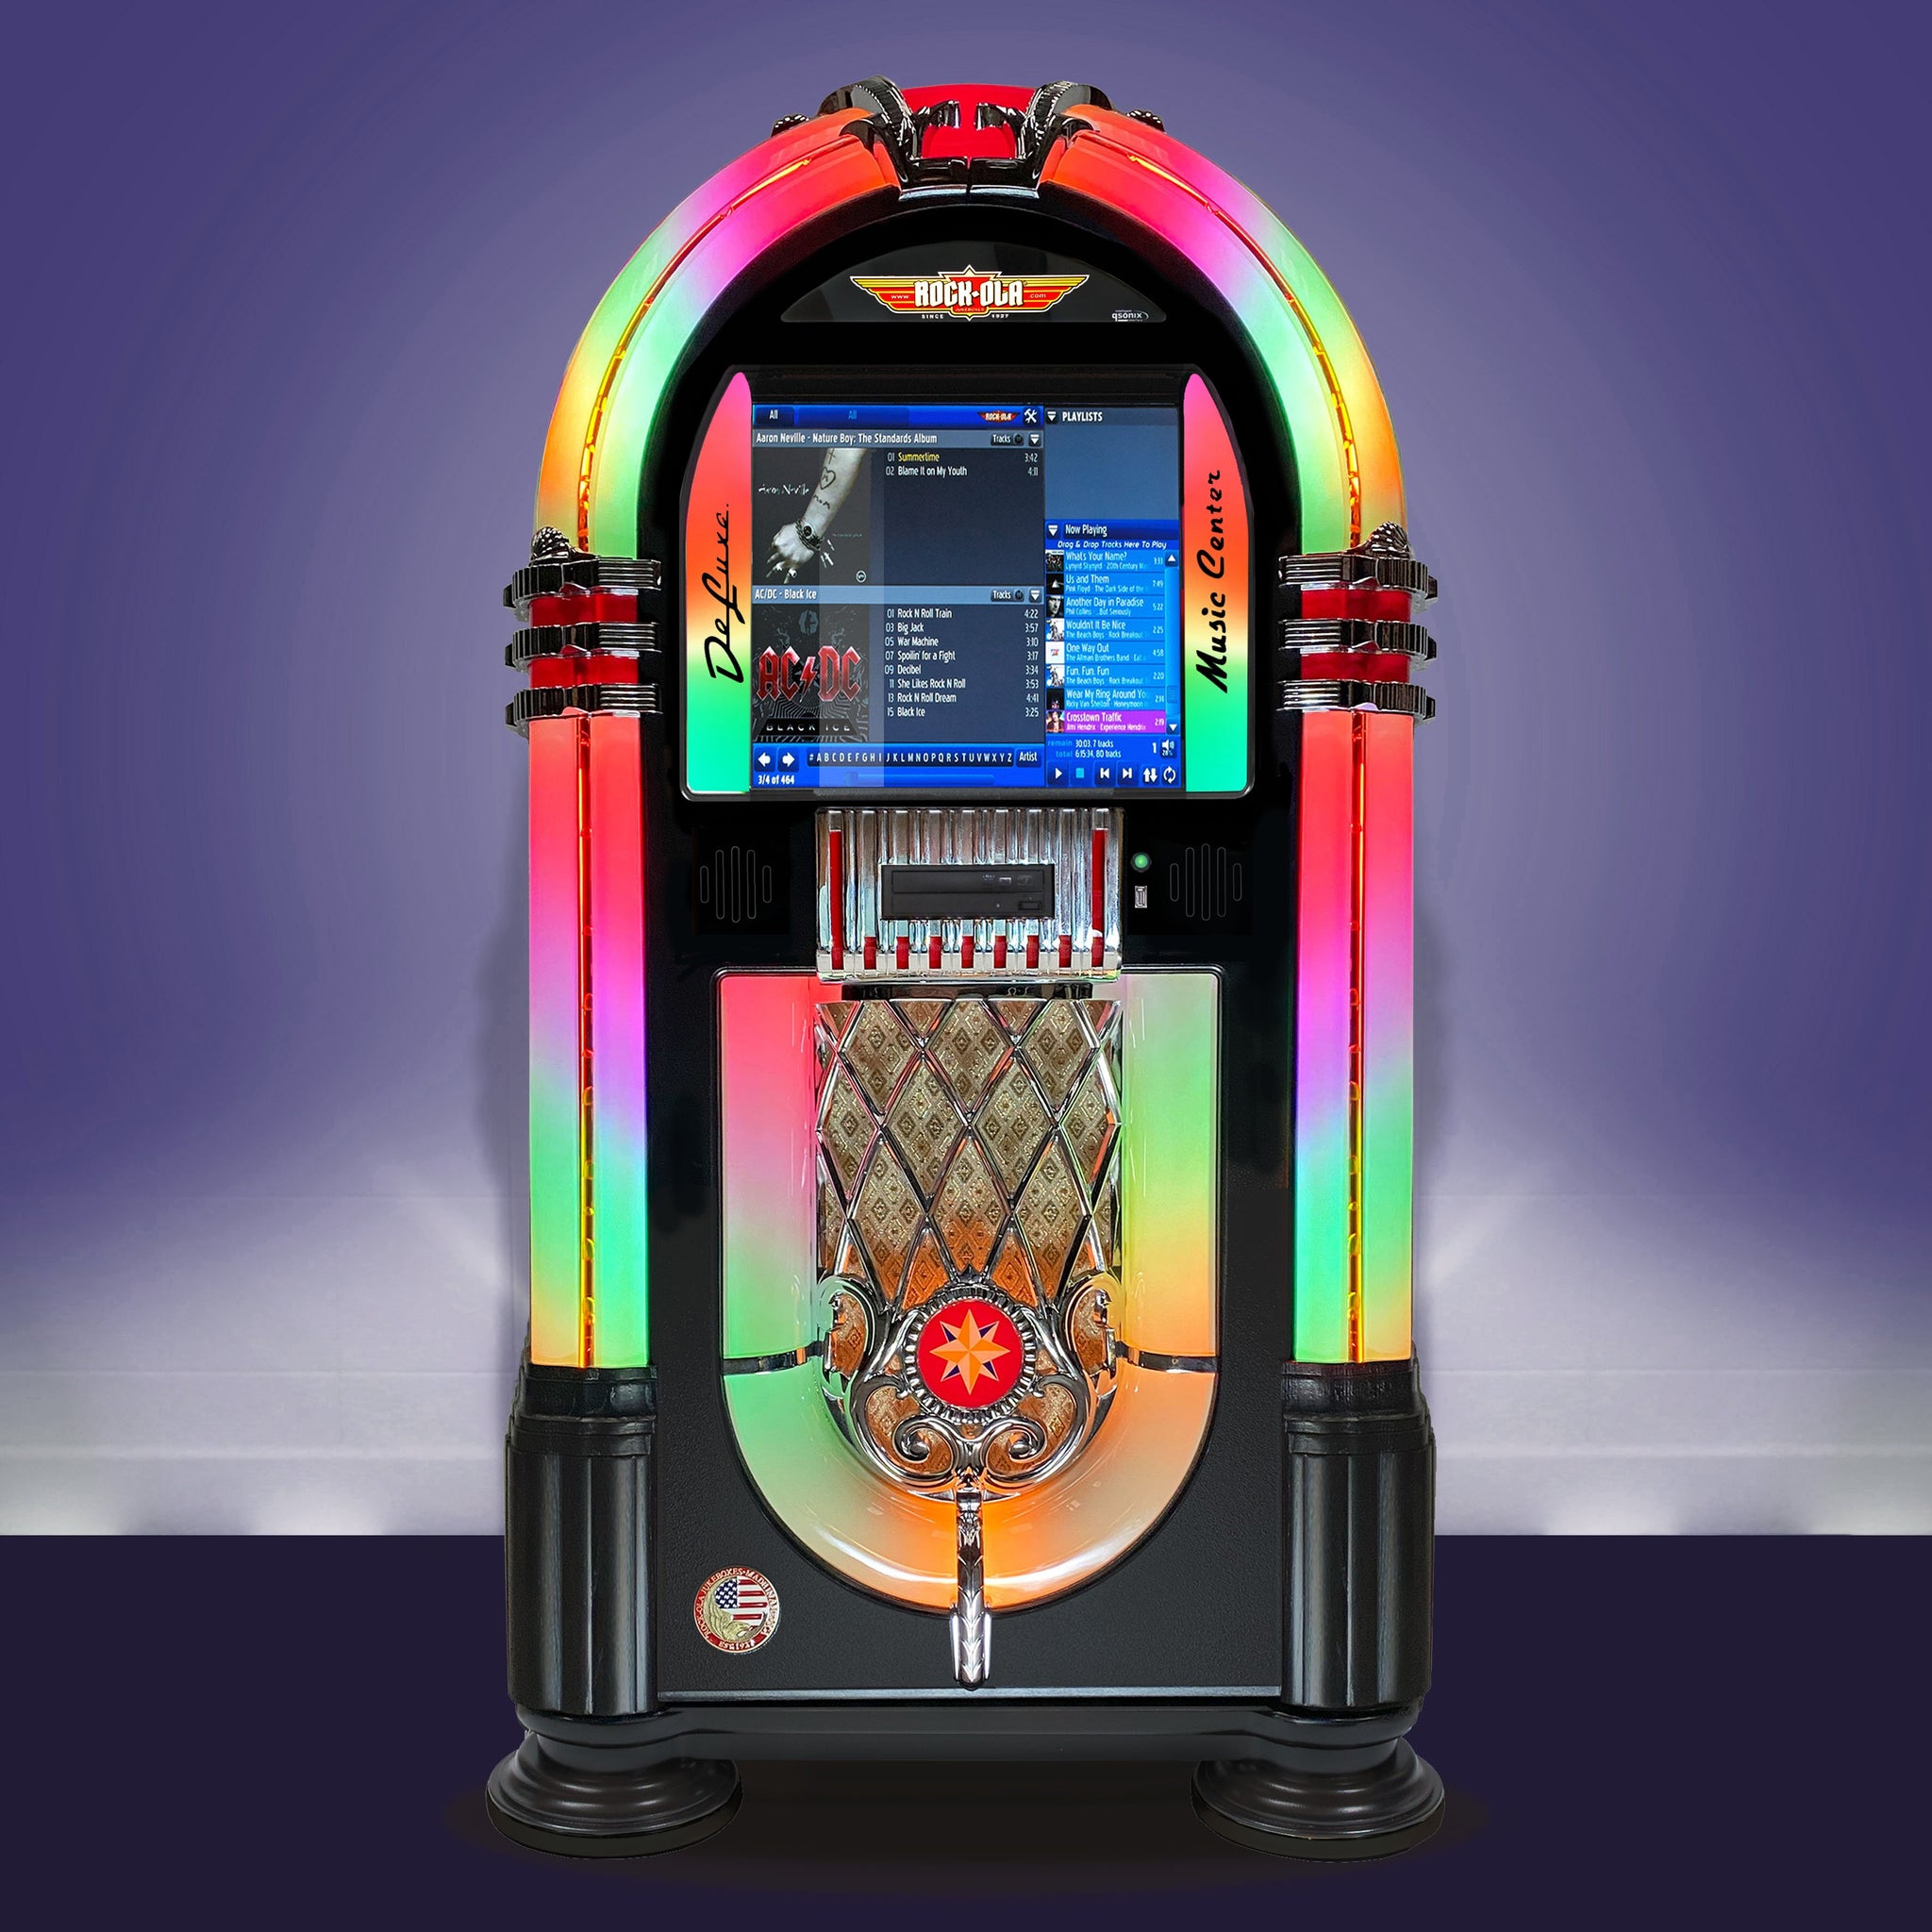 Rock-Ola Bubbler Digital Music Center Jukebox in Gloss Black with Bluetooth